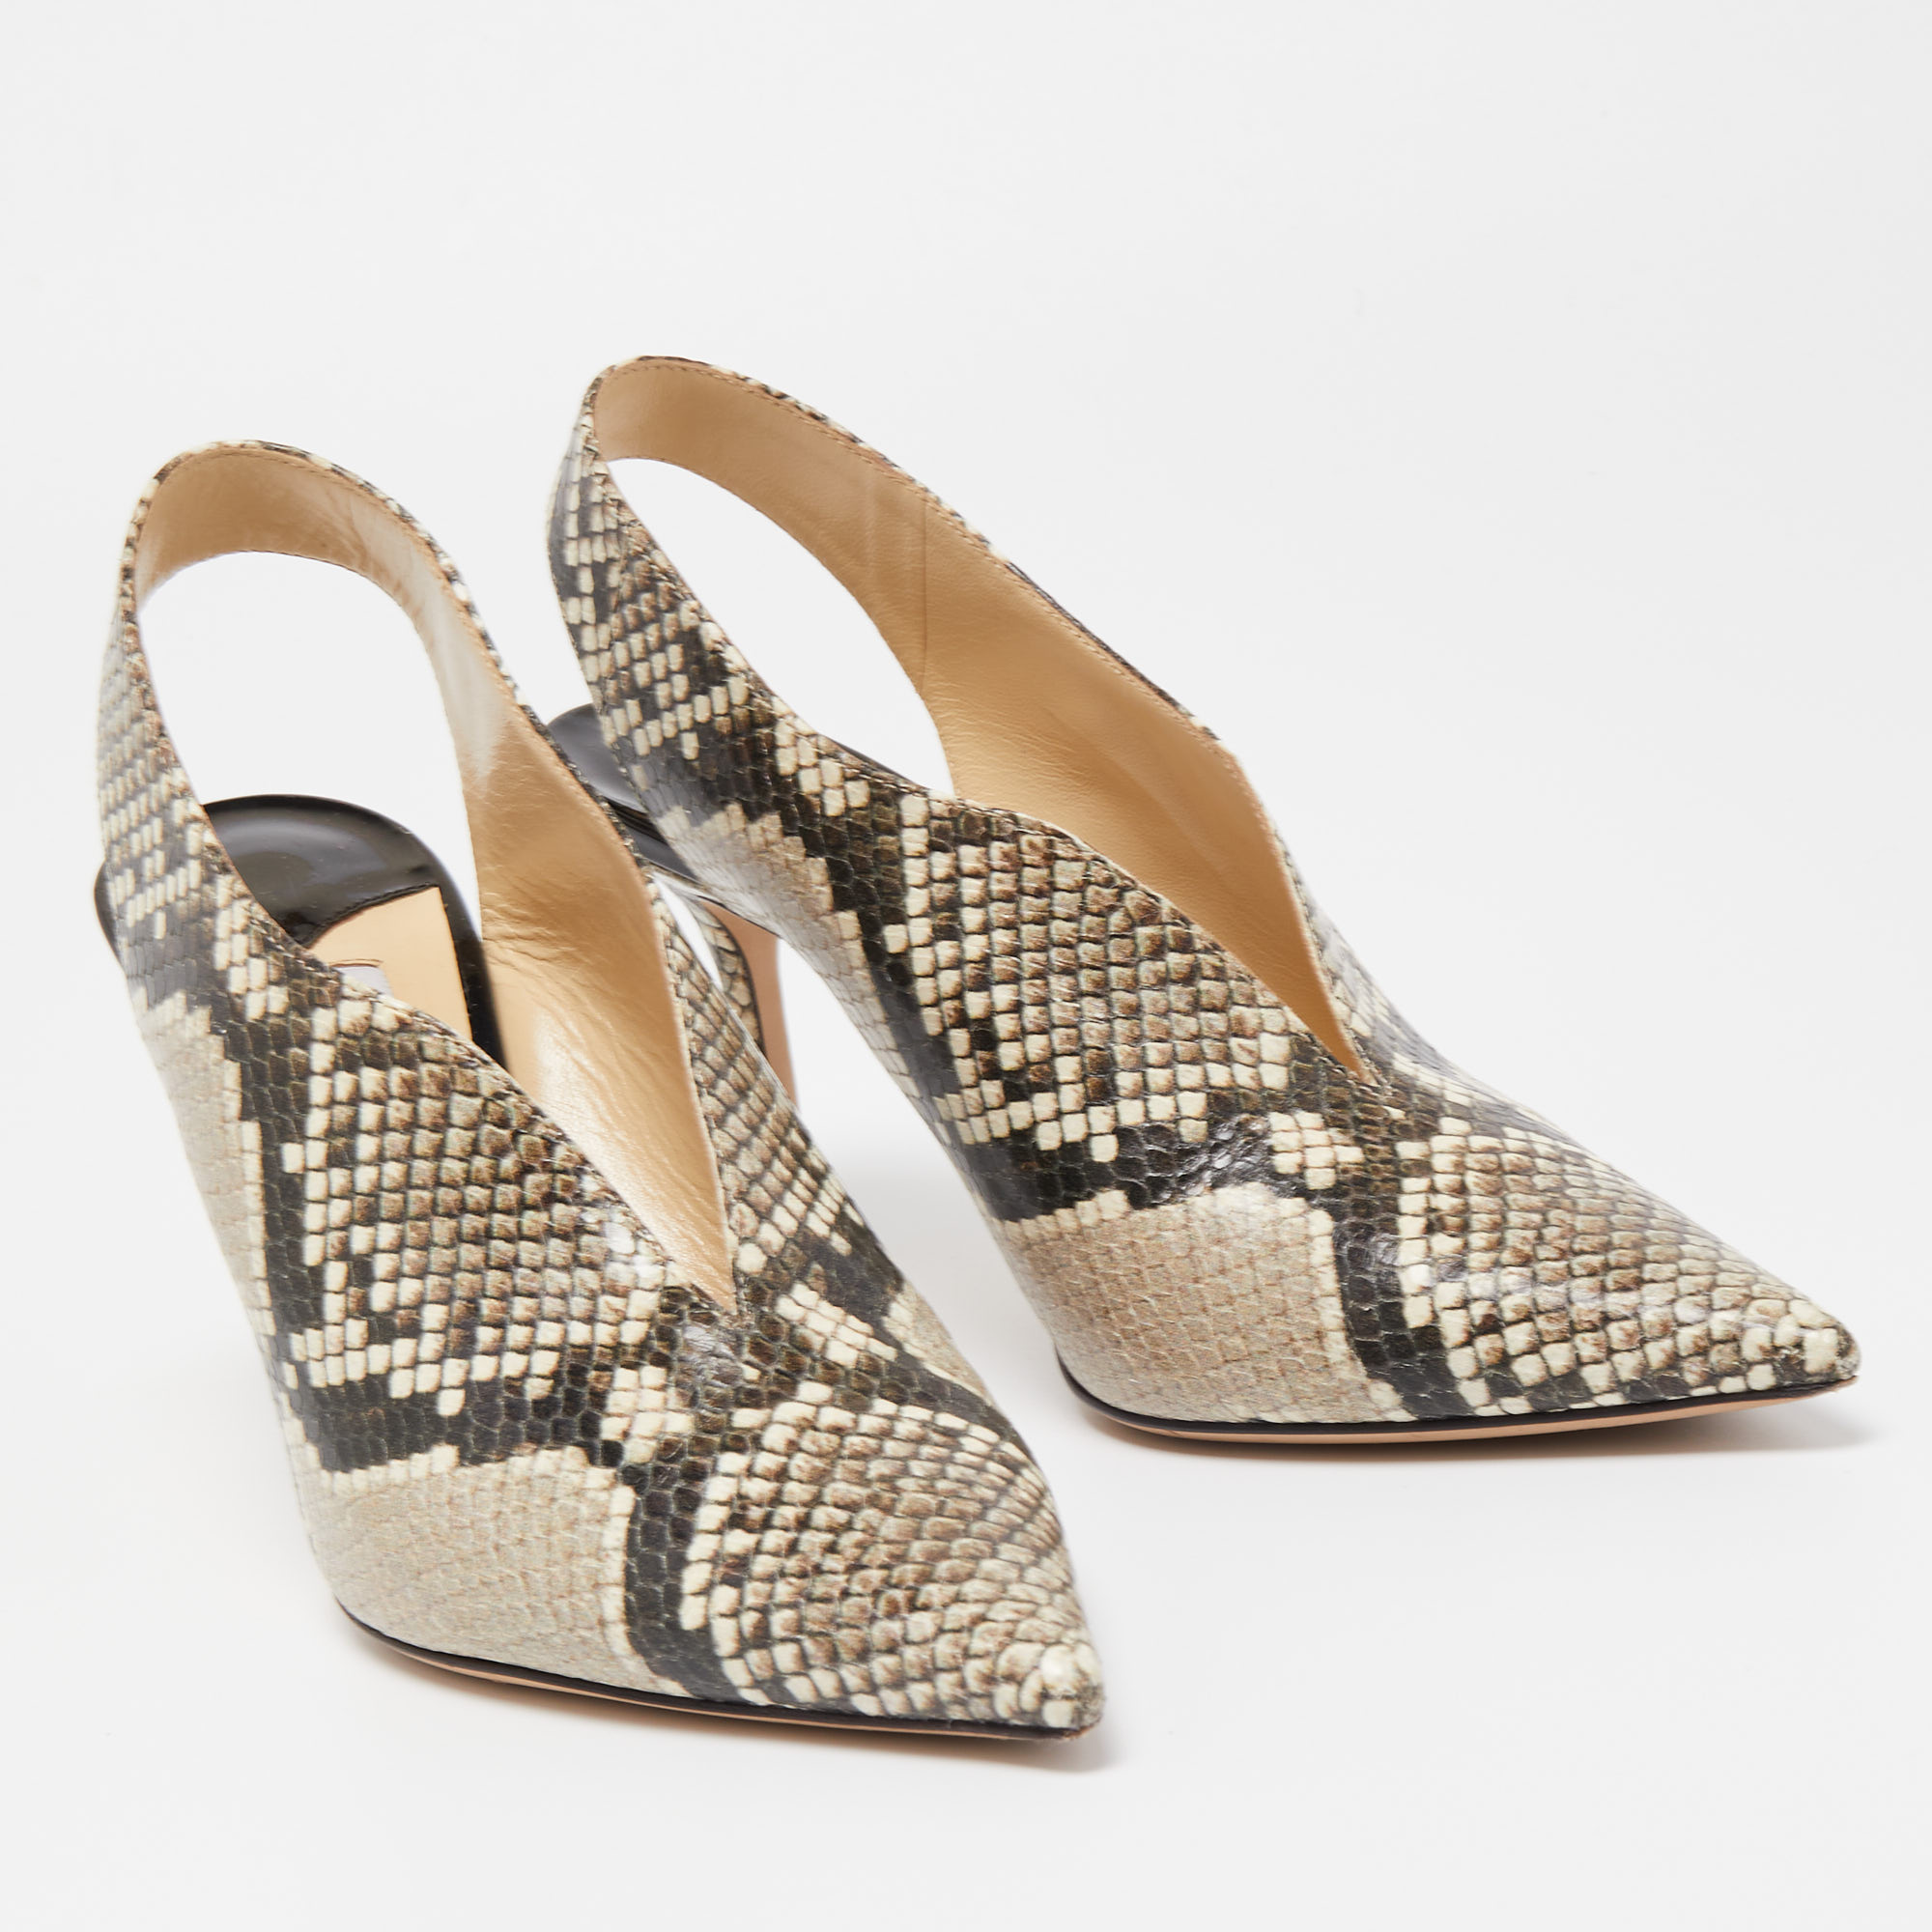 Jimmy Choo Brown/Beige Python Embossed Leather Pointed Toe Slingback Pumps Size 37